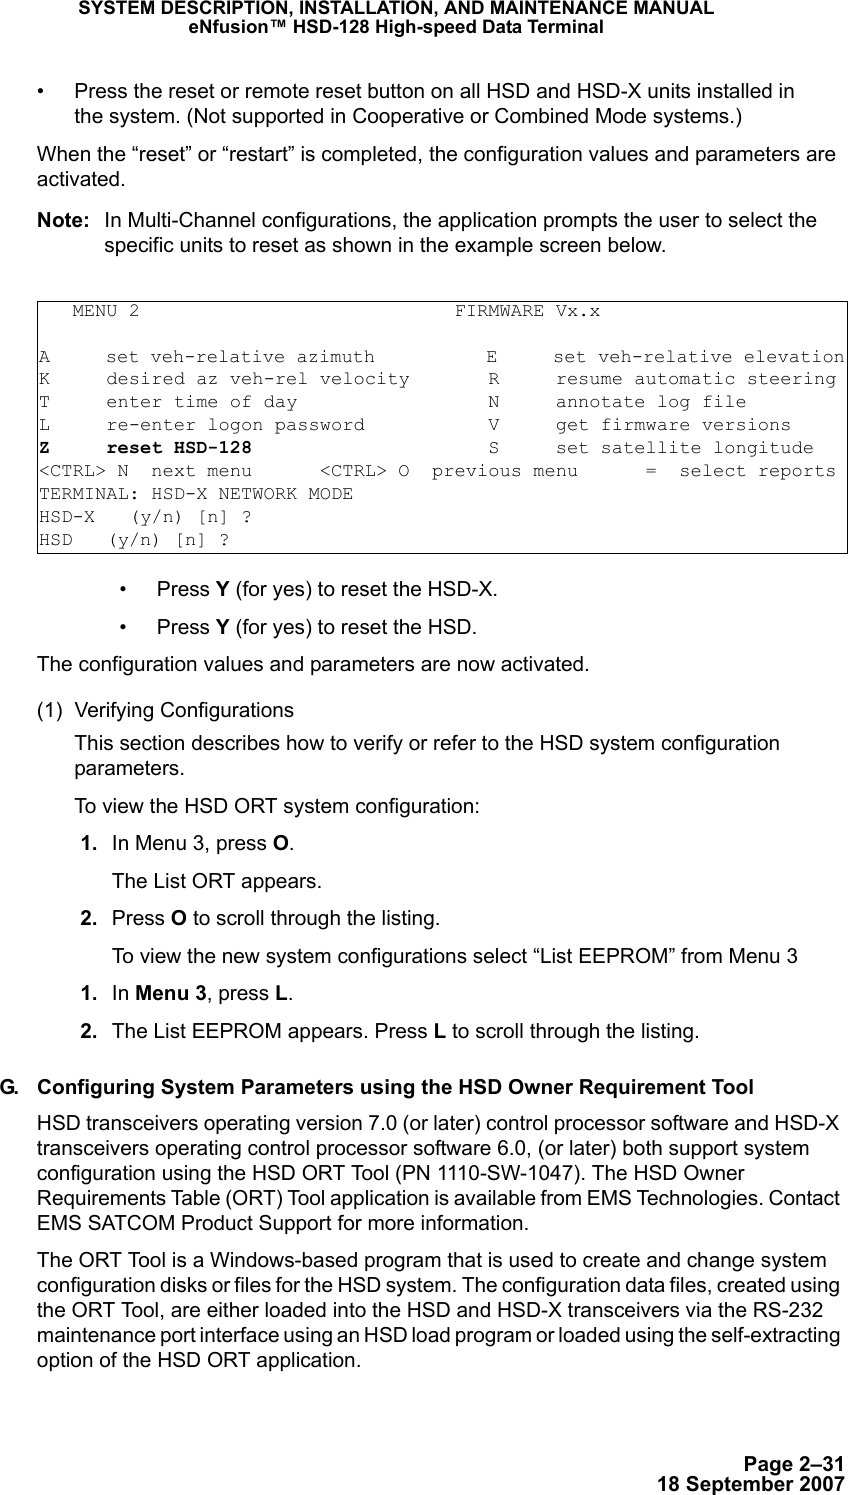 Page 2–3118 September 2007SYSTEM DESCRIPTION, INSTALLATION, AND MAINTENANCE MANUALeNfusion™ HSD-128 High-speed Data Terminal• Press the reset or remote reset button on all HSD and HSD-X units installed in  the system. (Not supported in Cooperative or Combined Mode systems.)When the “reset” or “restart” is completed, the configuration values and parameters are activated. Note: In Multi-Channel configurations, the application prompts the user to select the specific units to reset as shown in the example screen below.   • Press Y (for yes) to reset the HSD-X.• Press Y (for yes) to reset the HSD.The configuration values and parameters are now activated. (1) Verifying ConfigurationsThis section describes how to verify or refer to the HSD system configuration parameters. To view the HSD ORT system configuration:  1. In Menu 3, press O.The List ORT appears.  2. Press O to scroll through the listing. To view the new system configurations select “List EEPROM” from Menu 3 1. In Menu 3, press L. 2. The List EEPROM appears. Press L to scroll through the listing. G. Configuring System Parameters using the HSD Owner Requirement ToolHSD transceivers operating version 7.0 (or later) control processor software and HSD-X transceivers operating control processor software 6.0, (or later) both support system configuration using the HSD ORT Tool (PN 1110-SW-1047). The HSD Owner Requirements Table (ORT) Tool application is available from EMS Technologies. Contact EMS SATCOM Product Support for more information.The ORT Tool is a Windows-based program that is used to create and change system configuration disks or files for the HSD system. The configuration data files, created using the ORT Tool, are either loaded into the HSD and HSD-X transceivers via the RS-232 maintenance port interface using an HSD load program or loaded using the self-extracting option of the HSD ORT application.   MENU 2                            FIRMWARE Vx.xA     set veh-relative azimuth          E     set veh-relative elevationK     desired az veh-rel velocity       R     resume automatic steeringT     enter time of day                 N     annotate log fileL     re-enter logon password           V     get firmware versionsZ     reset HSD-128                     S     set satellite longitude&lt;CTRL&gt; N  next menu      &lt;CTRL&gt; O  previous menu      =  select reportsTERMINAL: HSD-X NETWORK MODE     HSD-X   (y/n) [n] ? HSD   (y/n) [n] ? 